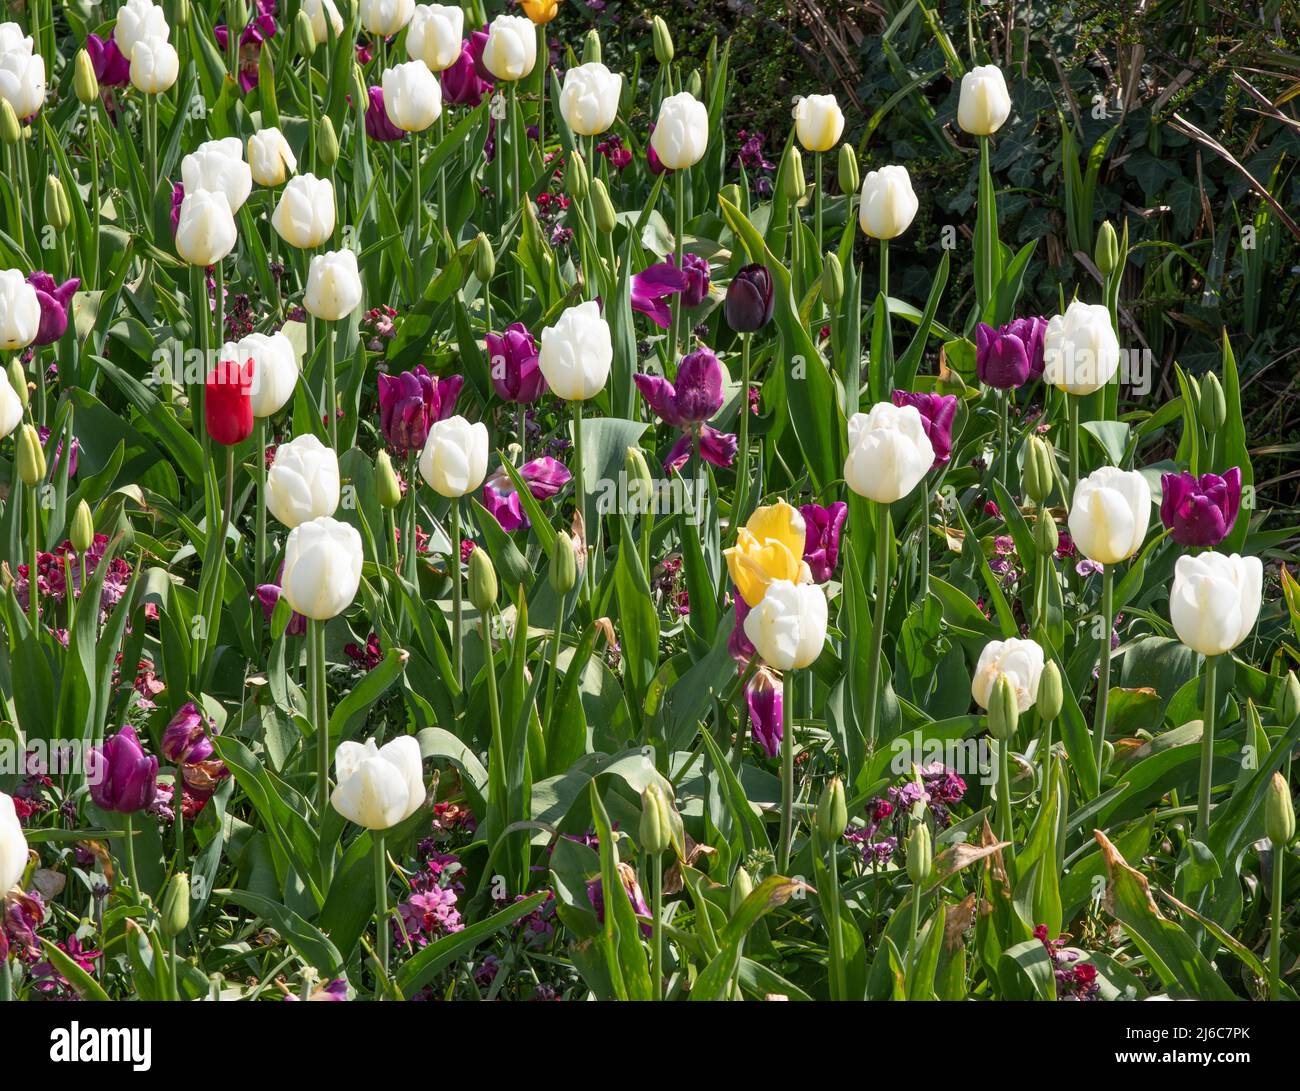 Mixed bed of late tulips Angel's Wish and Greuze Stock Photo